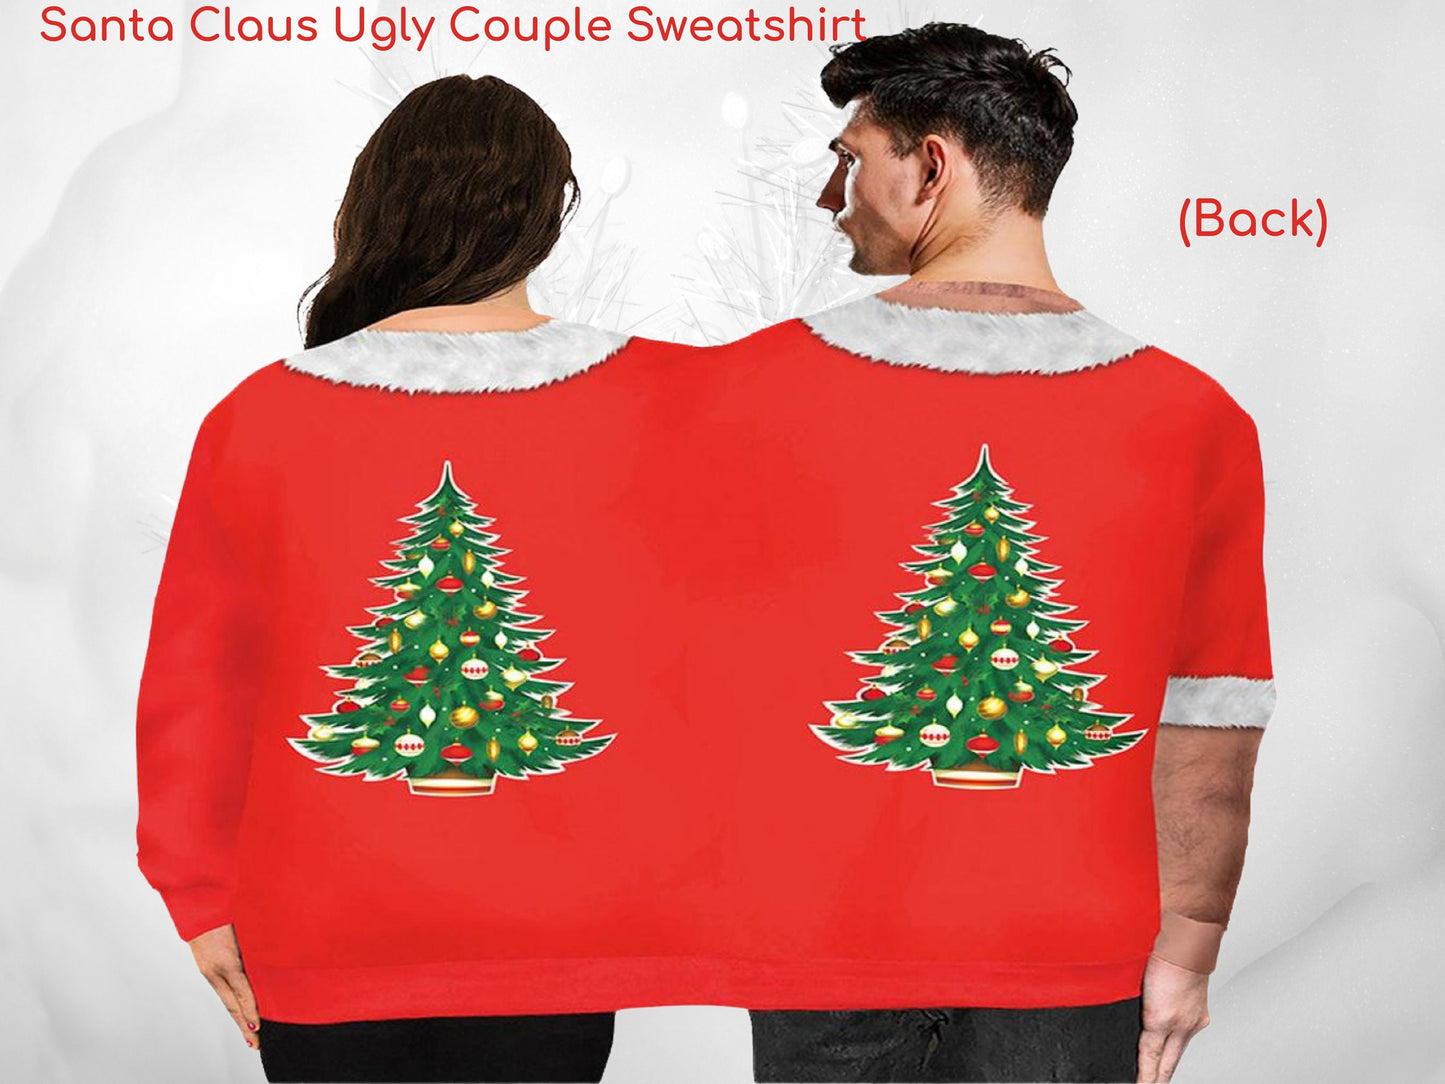 Ugly Christmas Sweater for Two, Ultimate One-for-Two Ugly Christmas Sweater, Ugly Christmas Sweatshirt, Funny, Christmas Present, Gift Idea - Chloe Lambertin